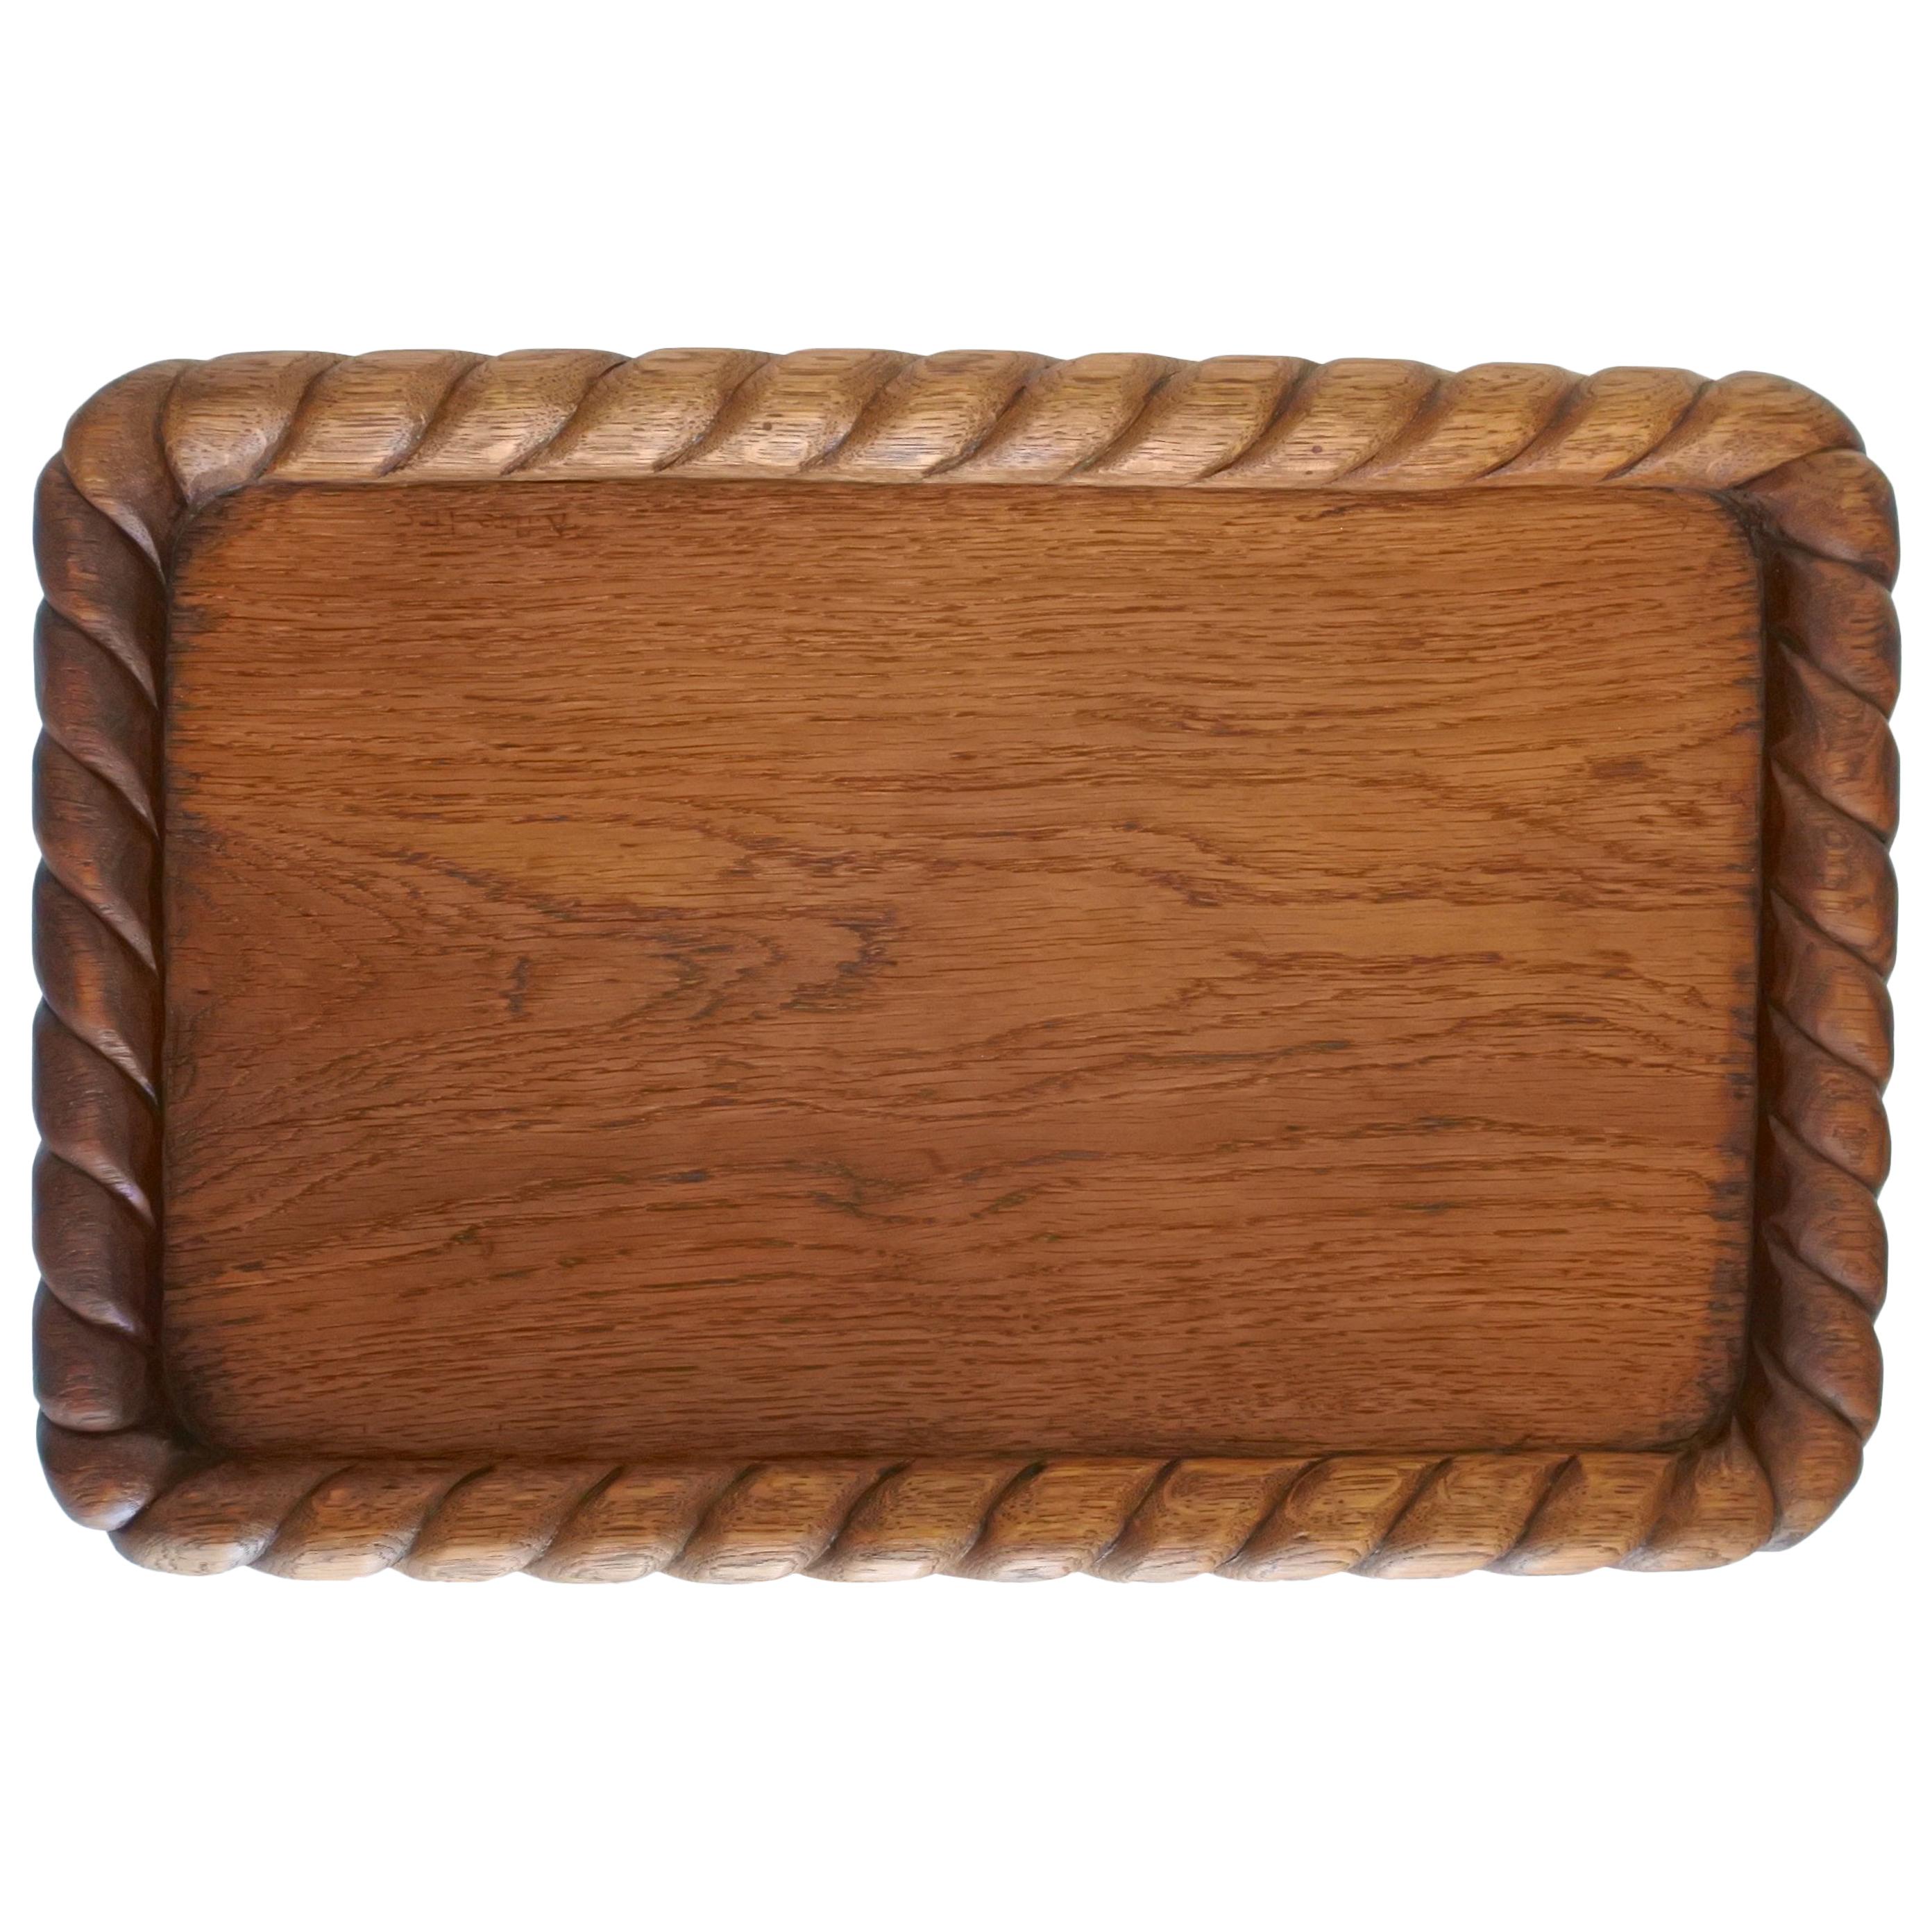 Midcentury Handcrafted Solid Oakwood Tray or Platter, France, 1950s